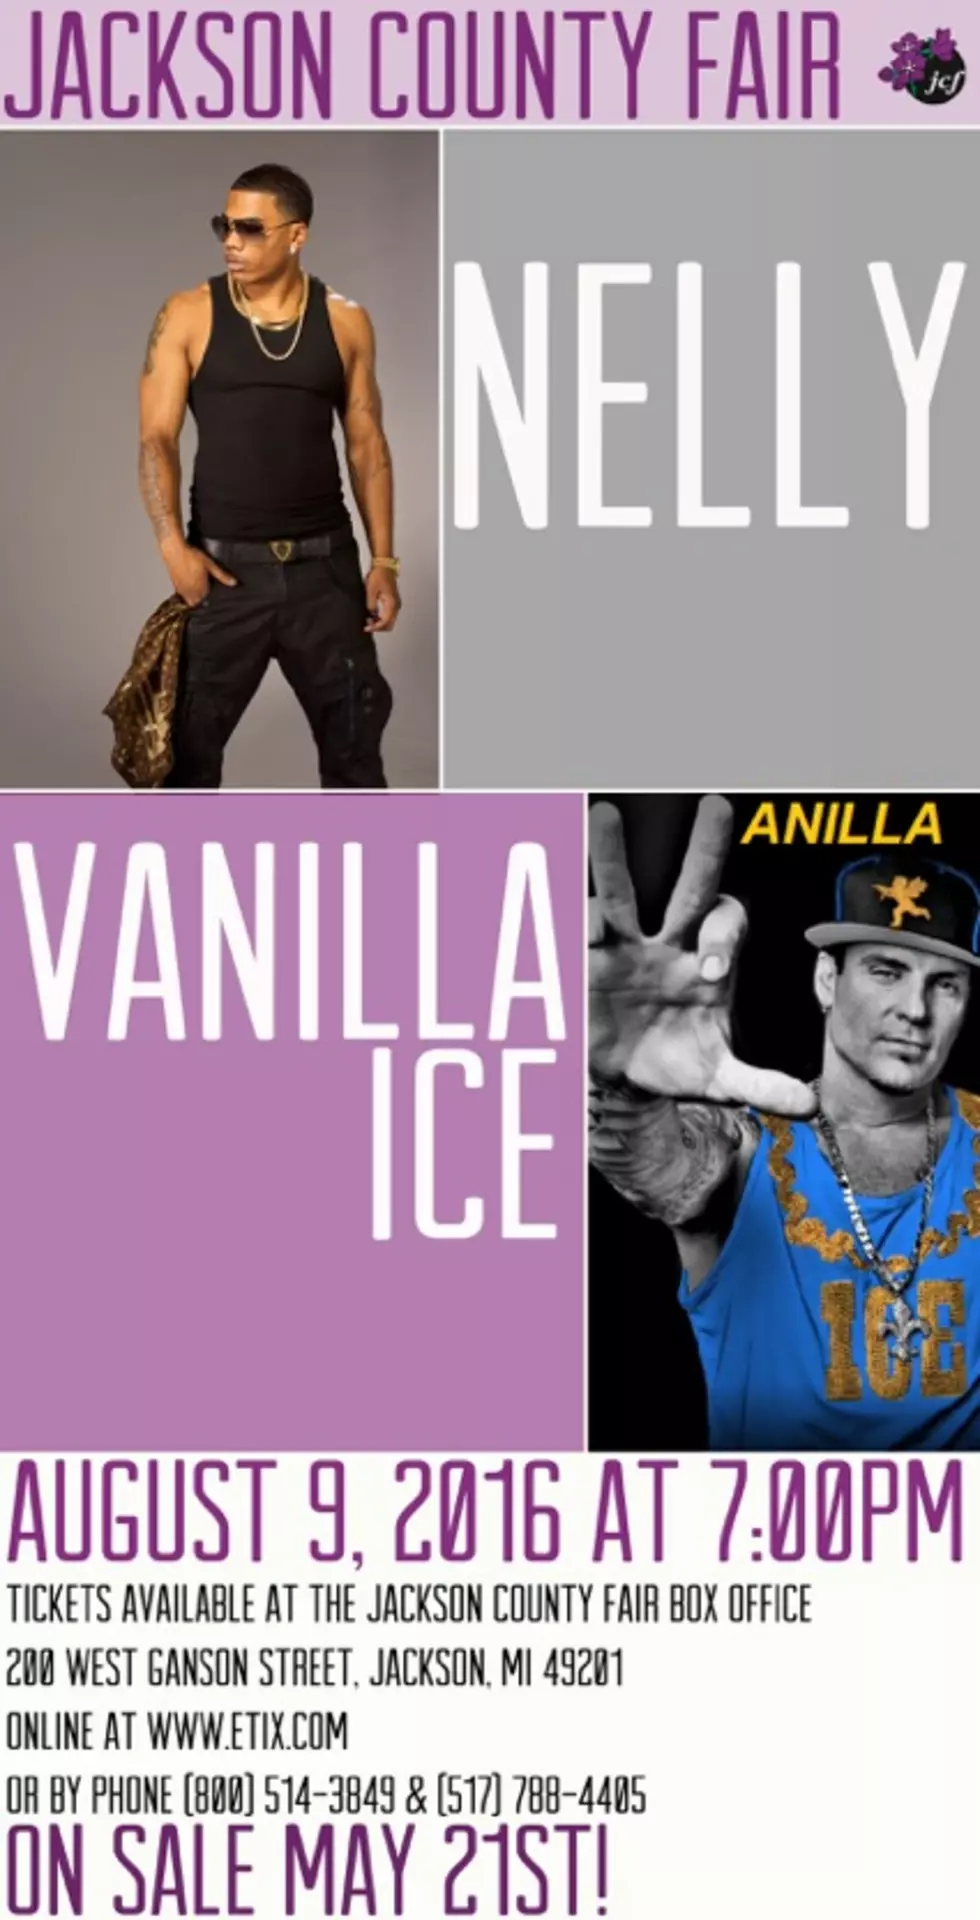 Nelly and Vanilla Ice Live at Jackson County Fair